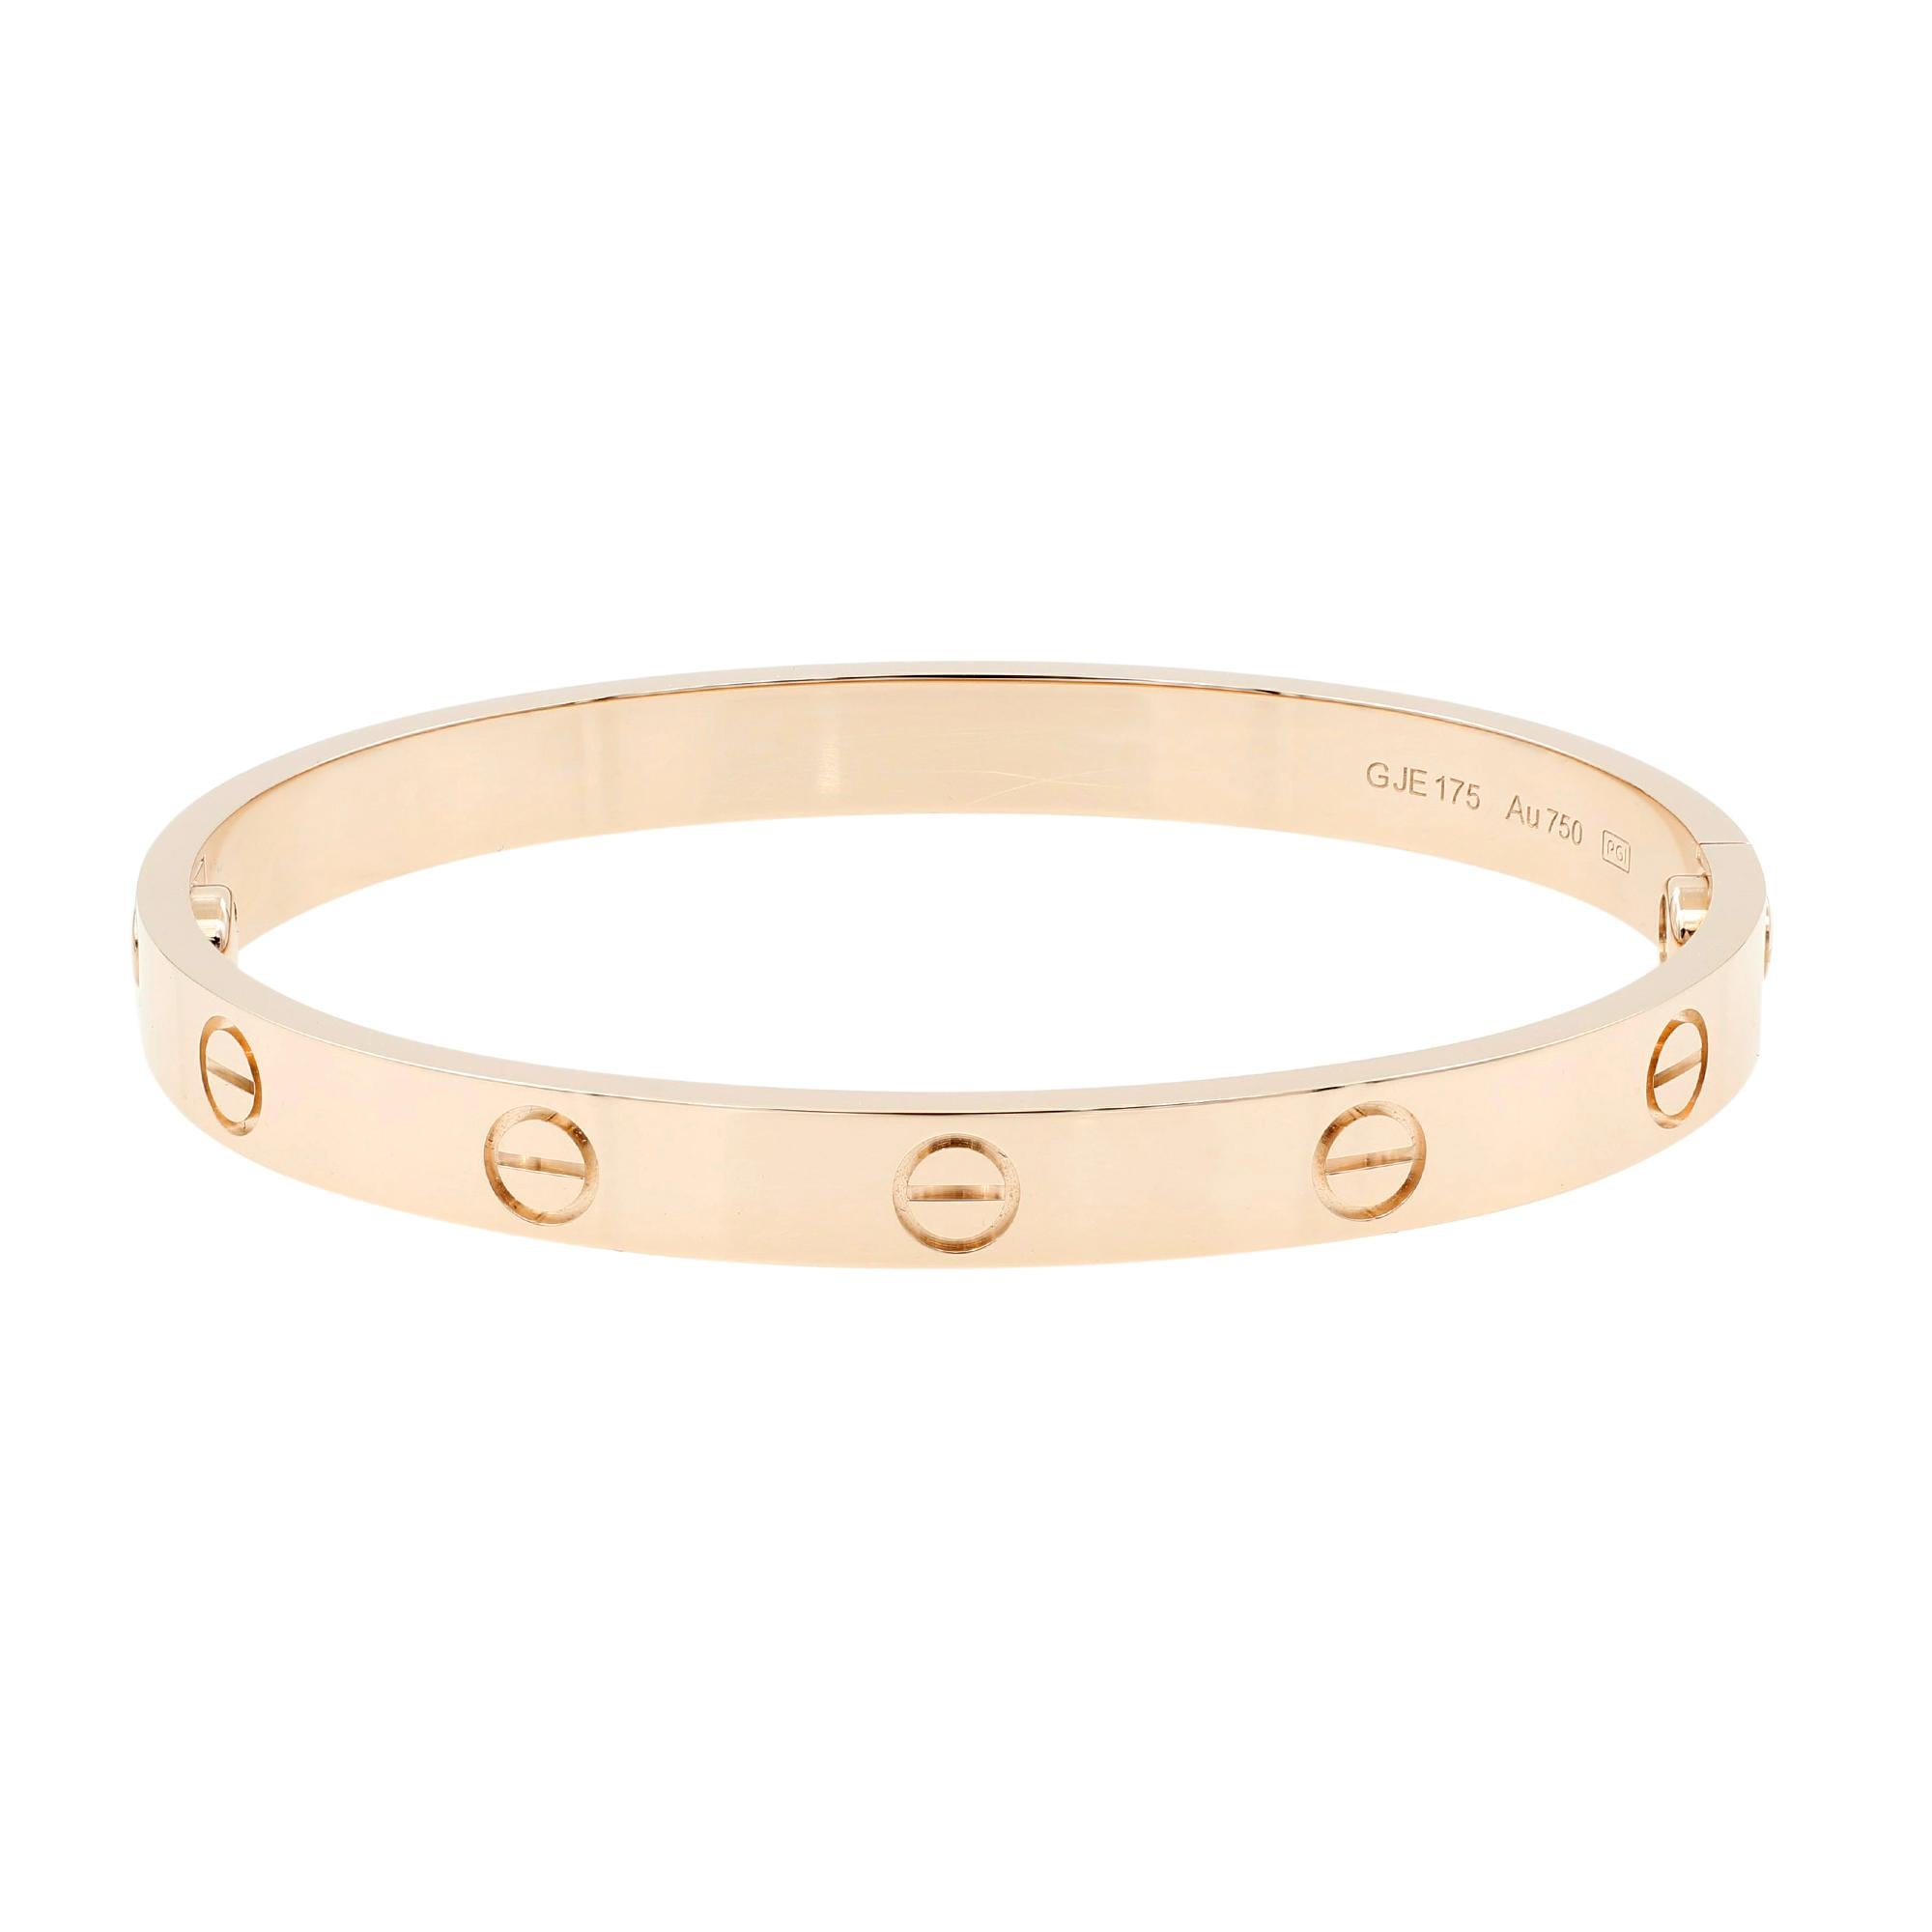 You are viewing a stunning Cartier 18 karat rose gold love bracelet. This 18K rose gold bracelet features the signature Cartier design and comes stamped with serial numbers, and other hallmarks, along with its original box, papers, screwdriver. Size